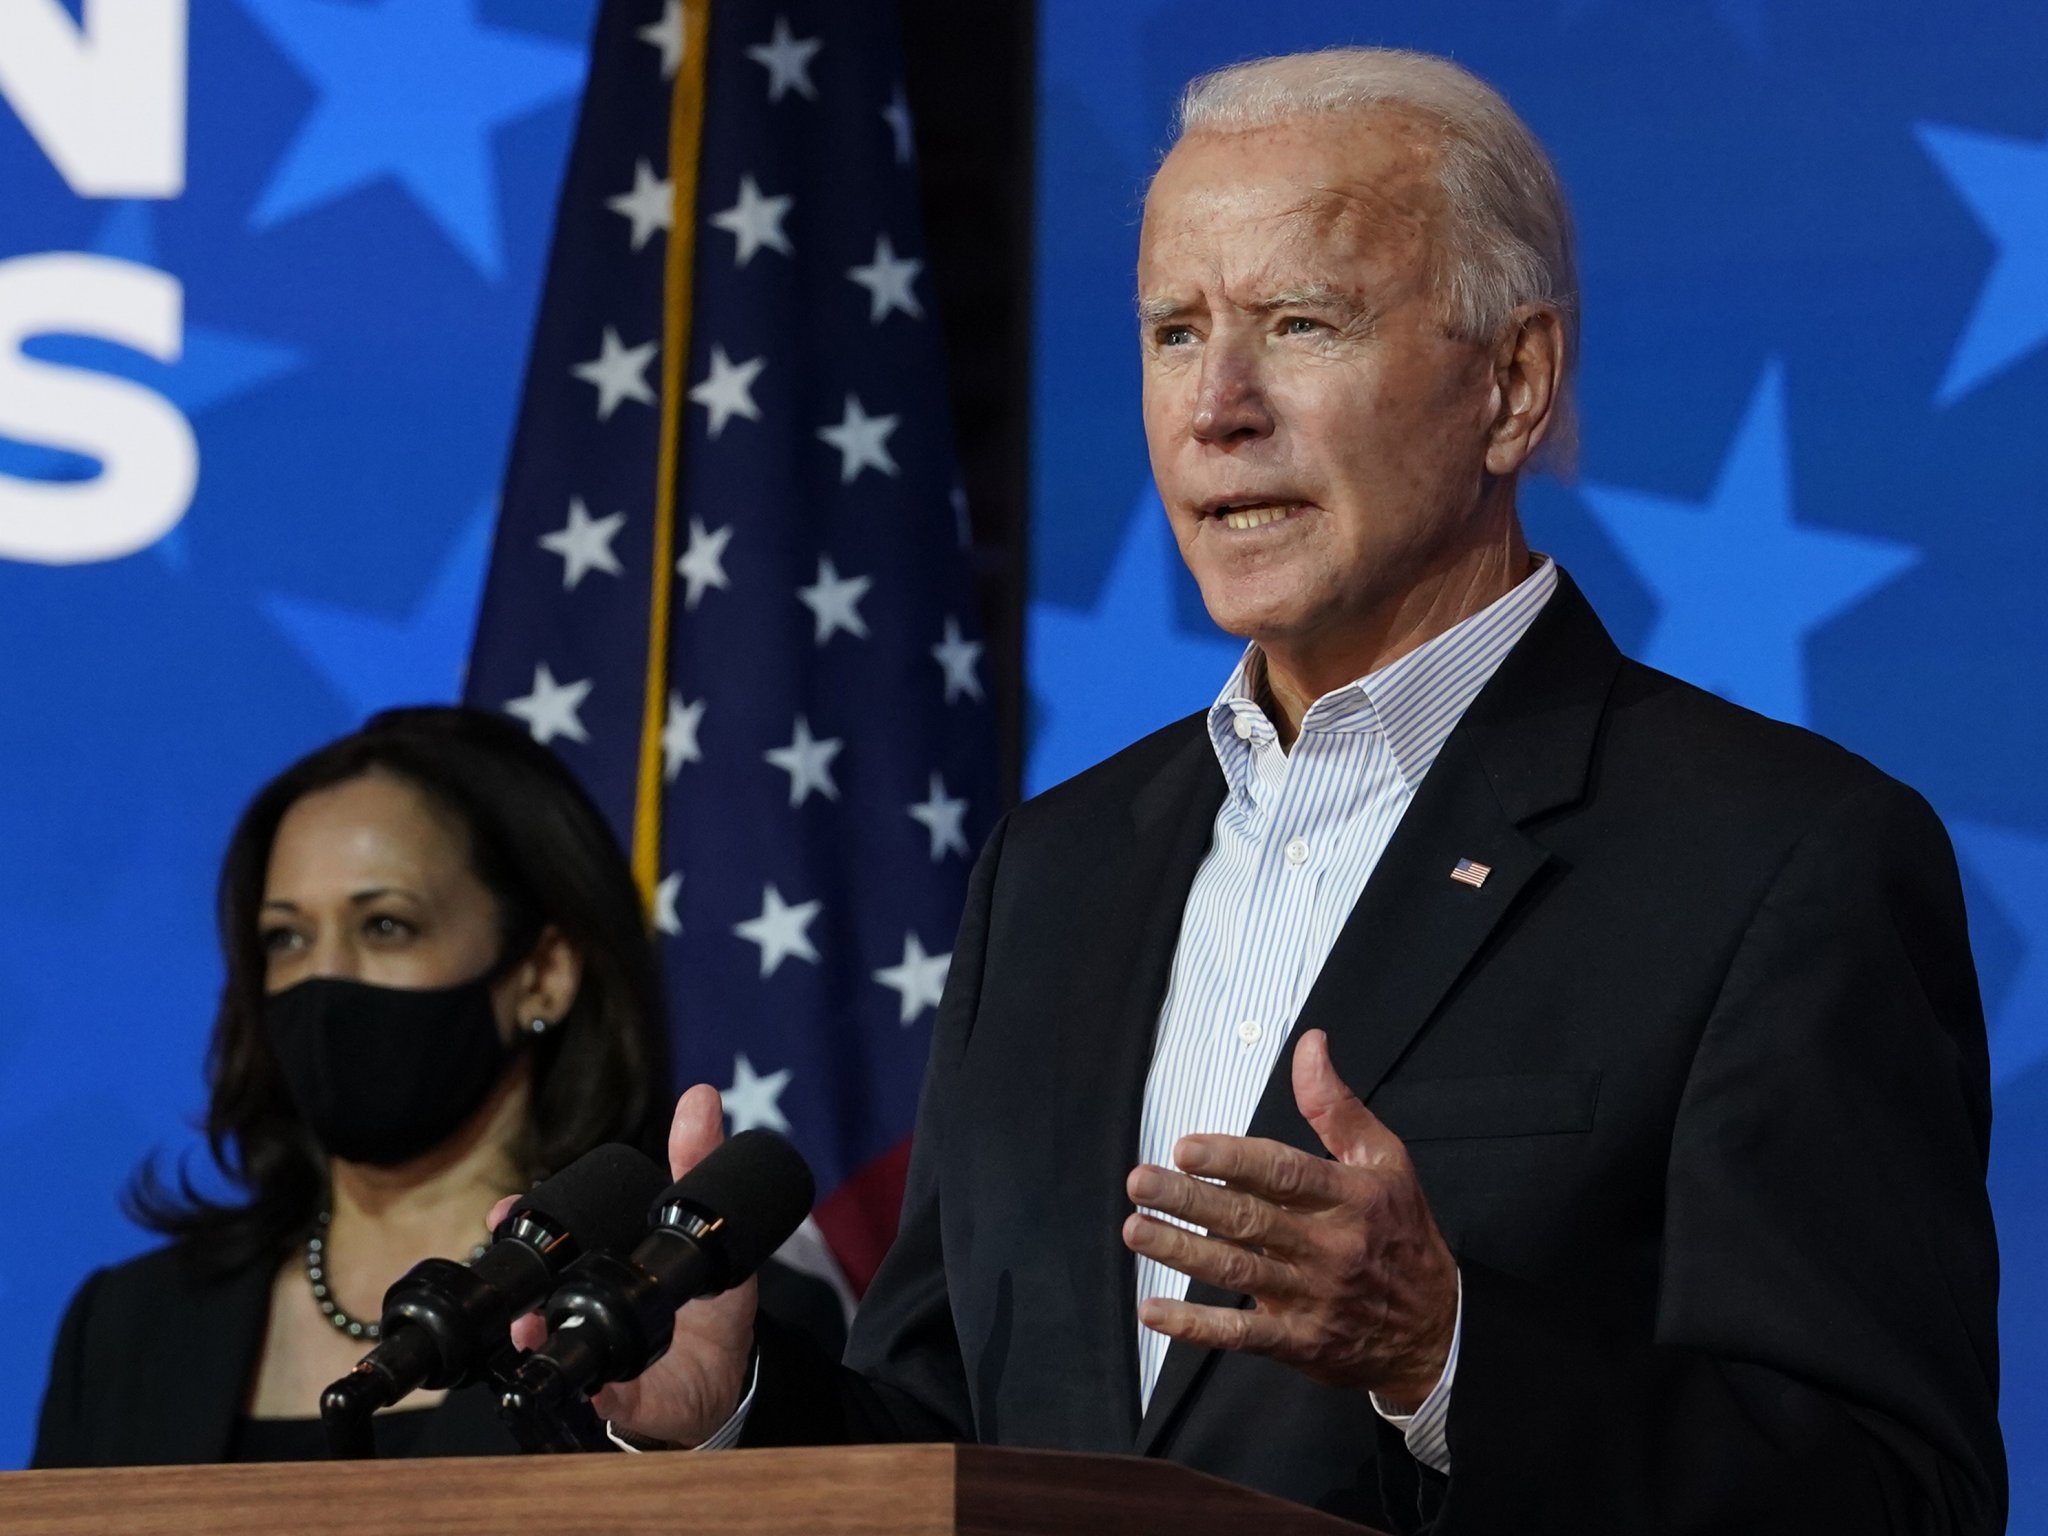 Biden's First 100 Days: Here's What To Expect